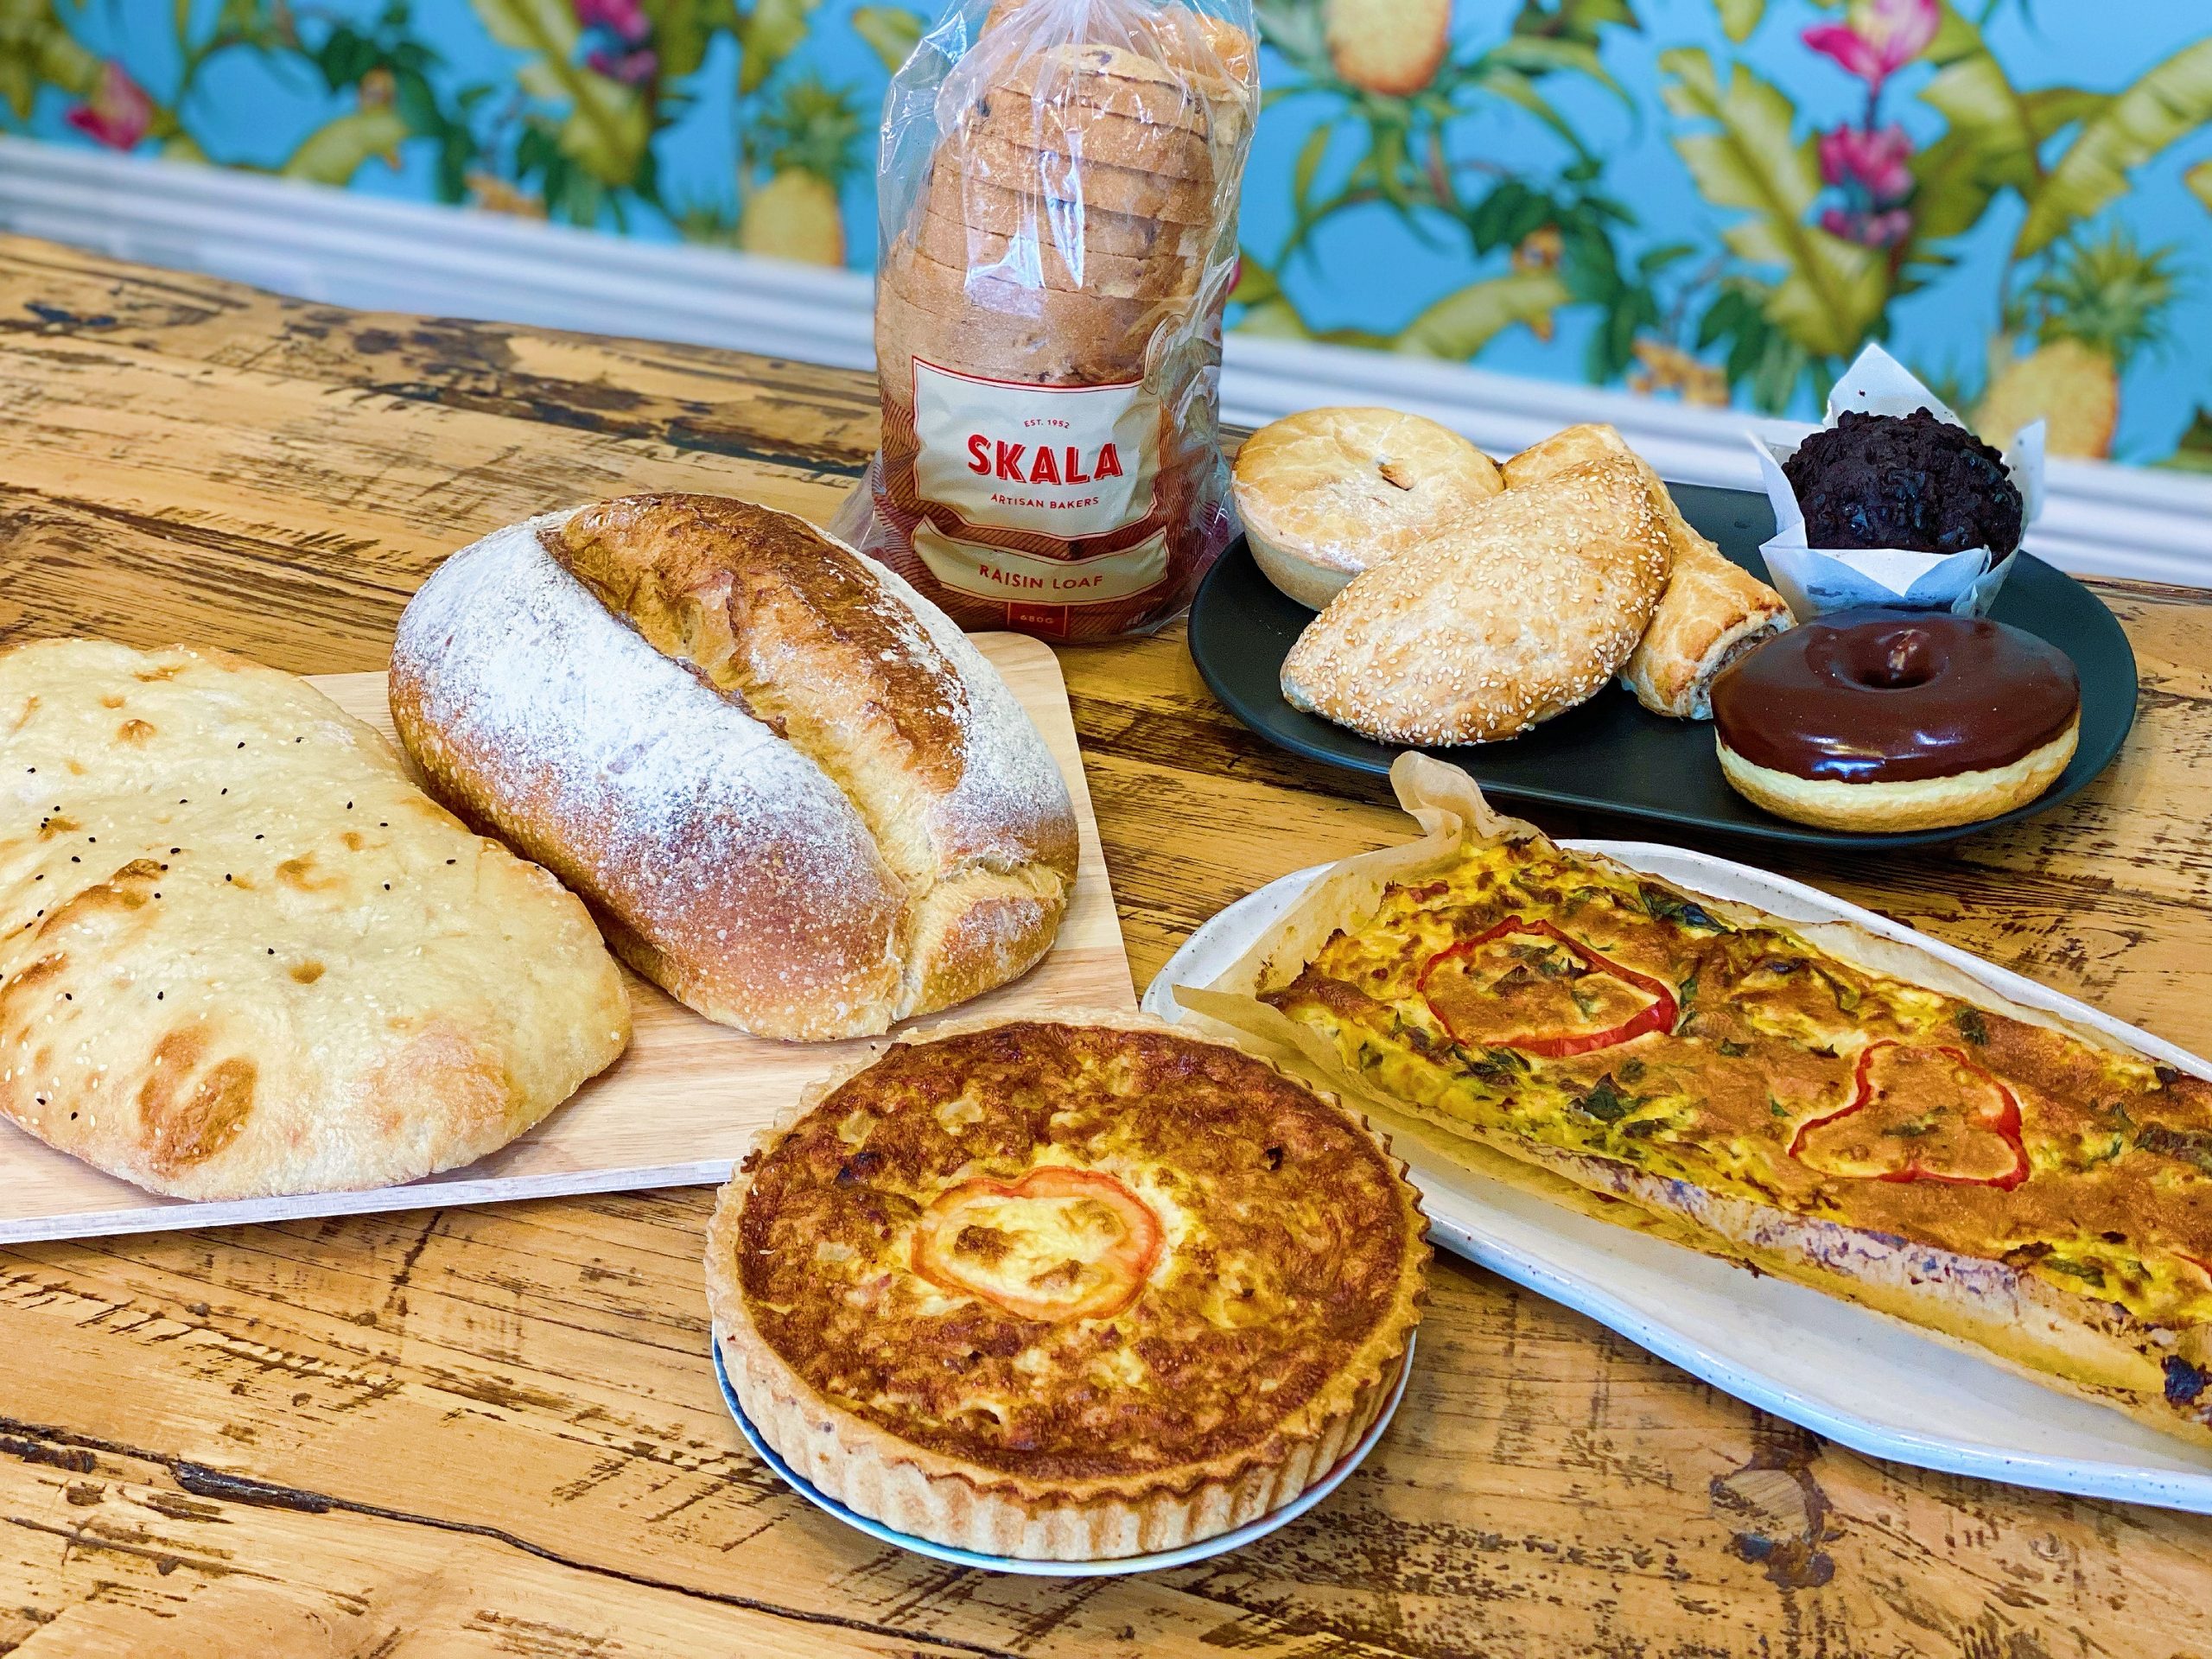 WIN two AMAZING Survival Kits from the delicious Skala Bakery